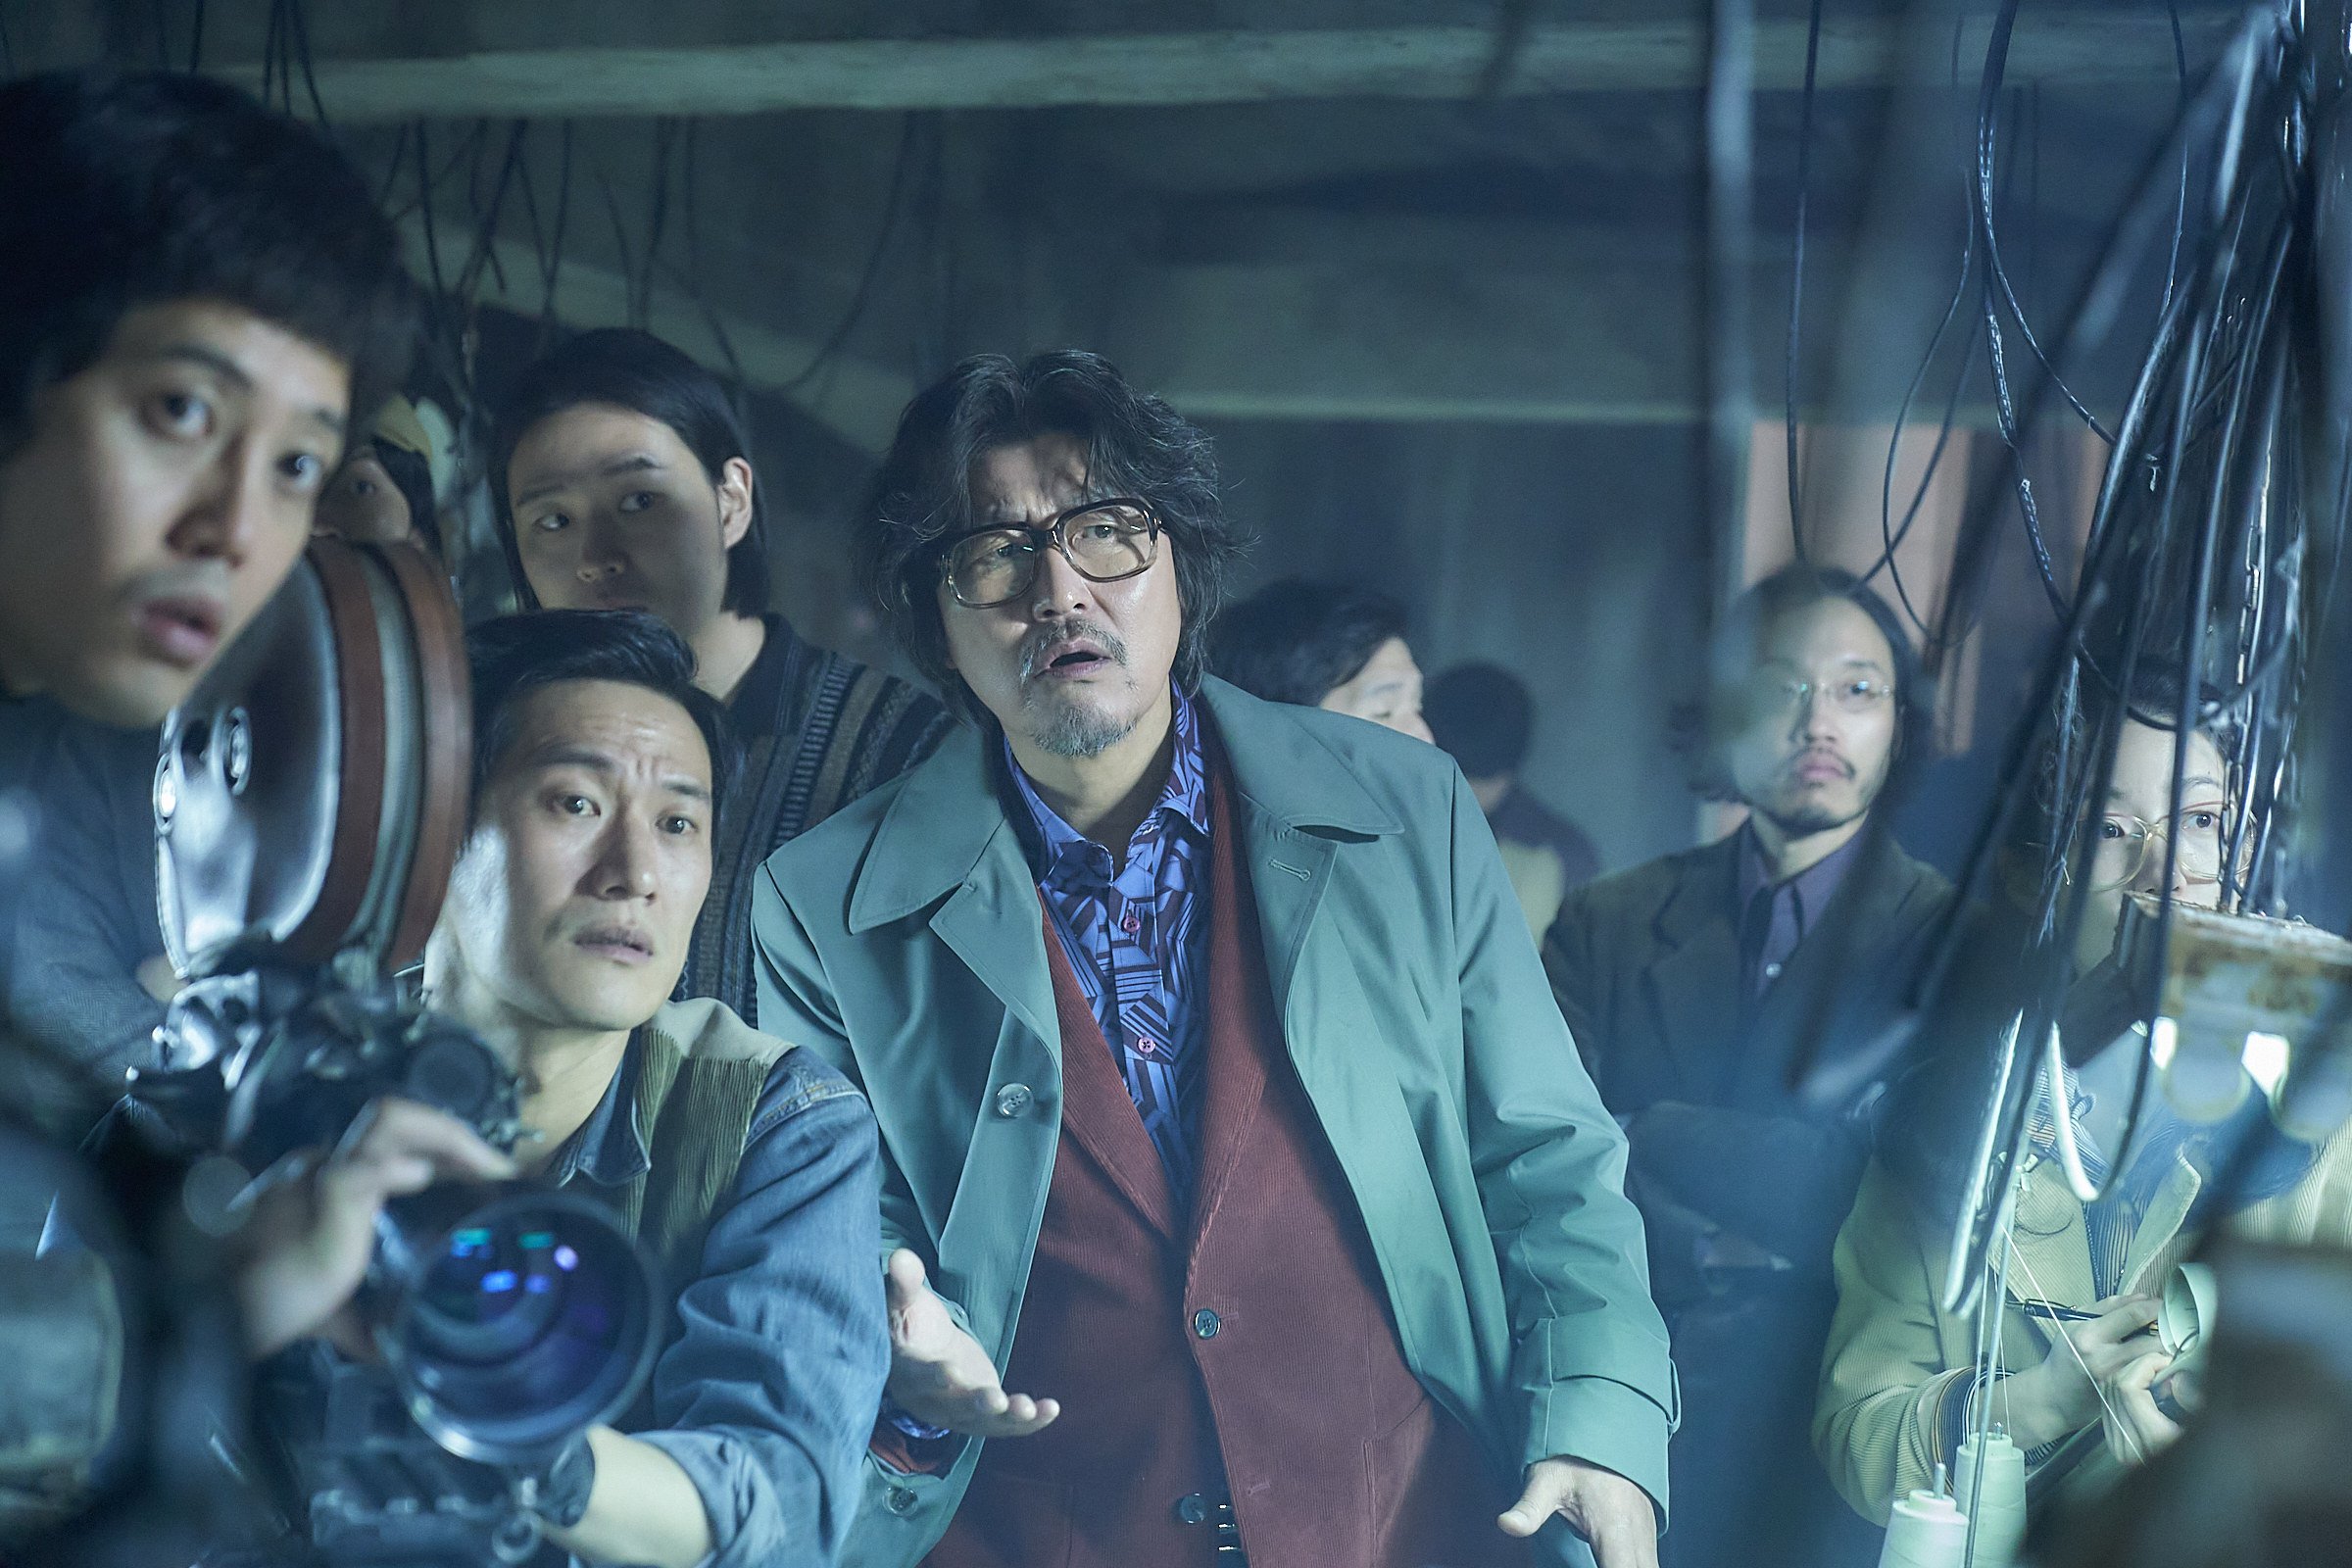 Song Kang-ho (centre) in a still from “Cobweb” (category TBC), a Korean film directed by Kim Jee-woon. Im Soo-jung, Oh Jung-se co-star.